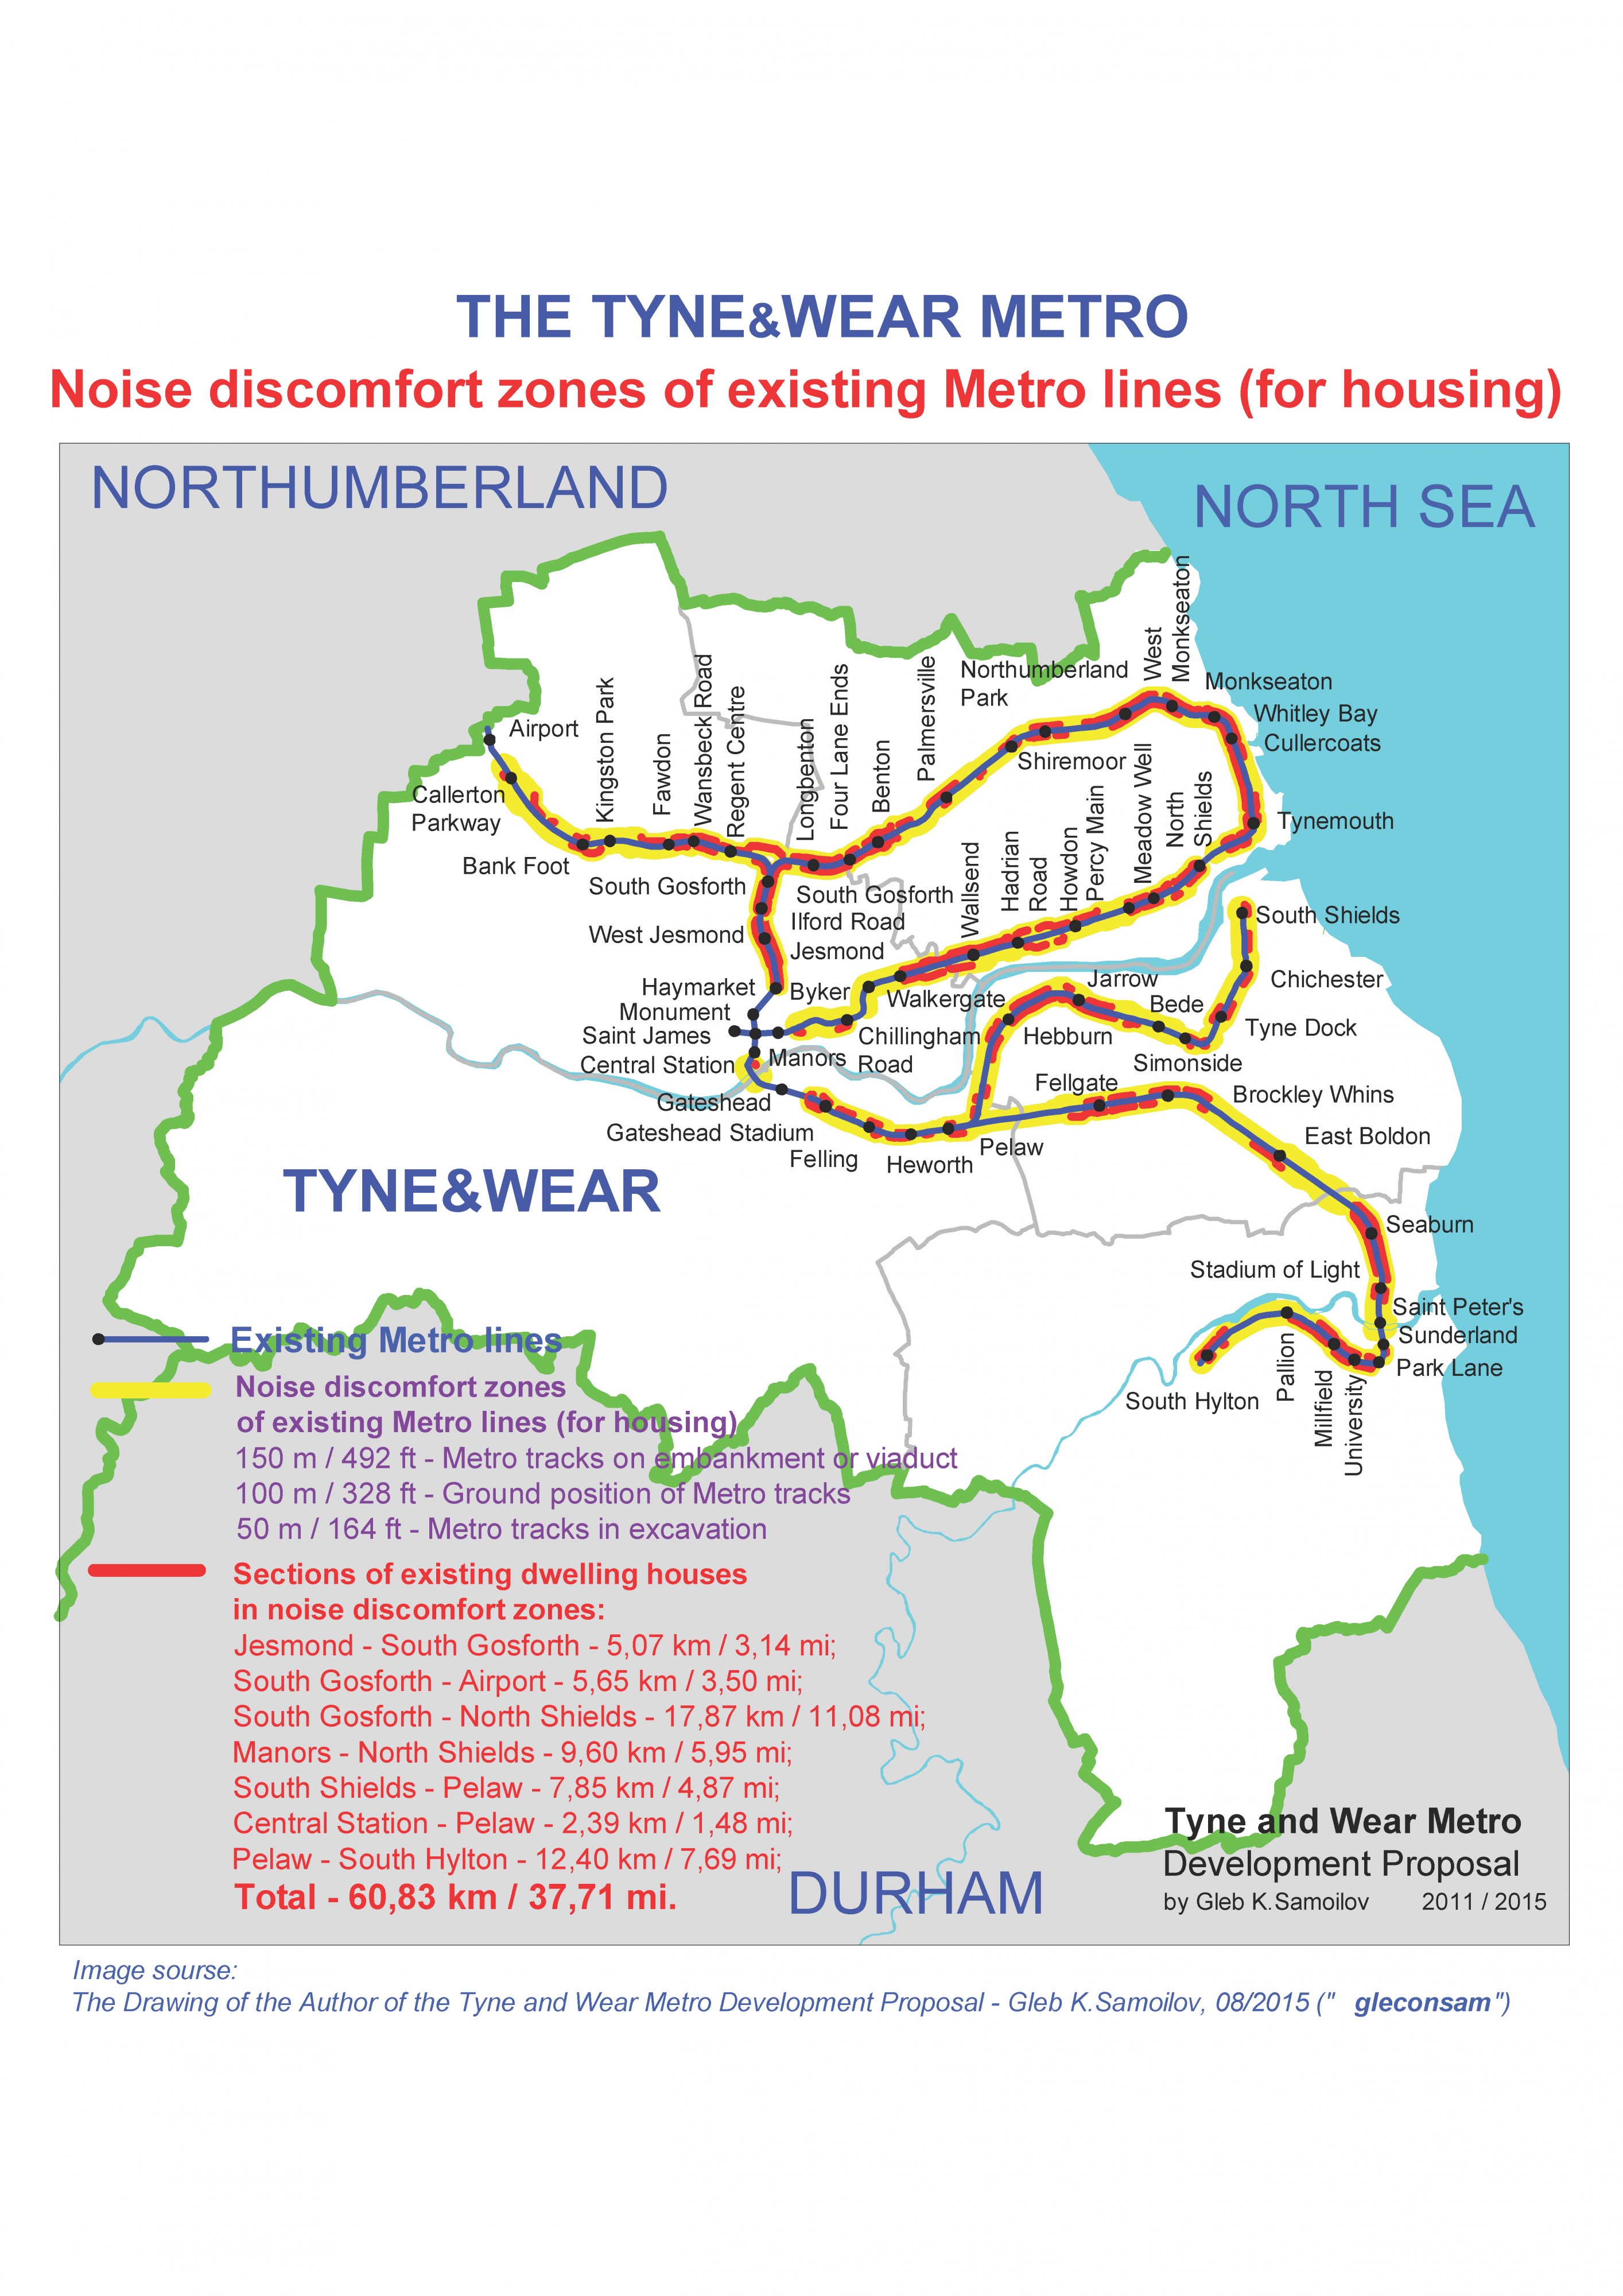 Noise discomfort zones of existing Tyne and Wear Metro lines for housing